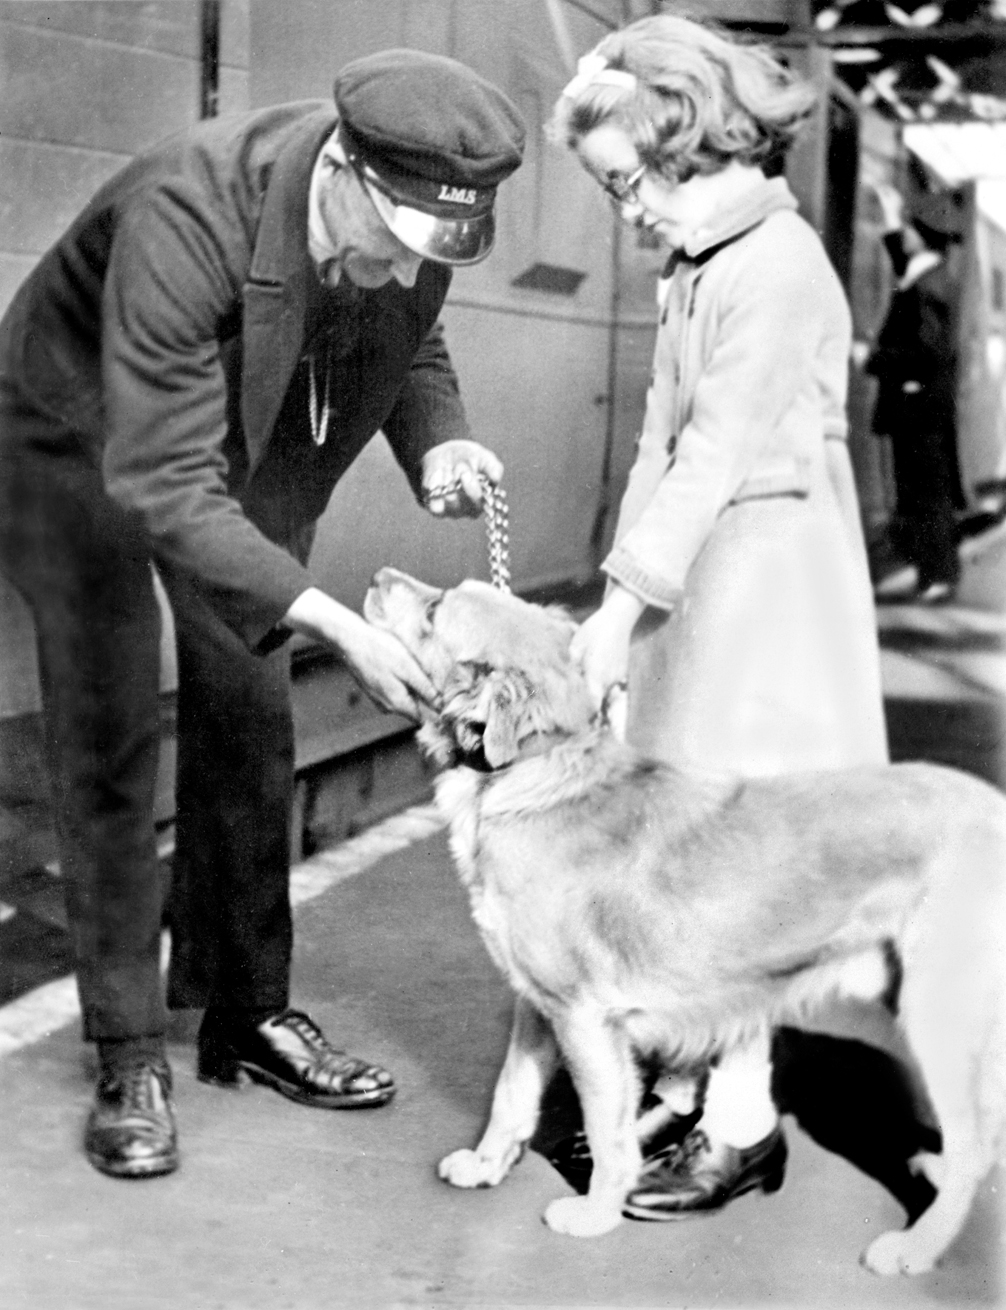 Dogs also lent station staff a helping hand during the Second World War. Lots of dogs like this one were used for war guard duties.